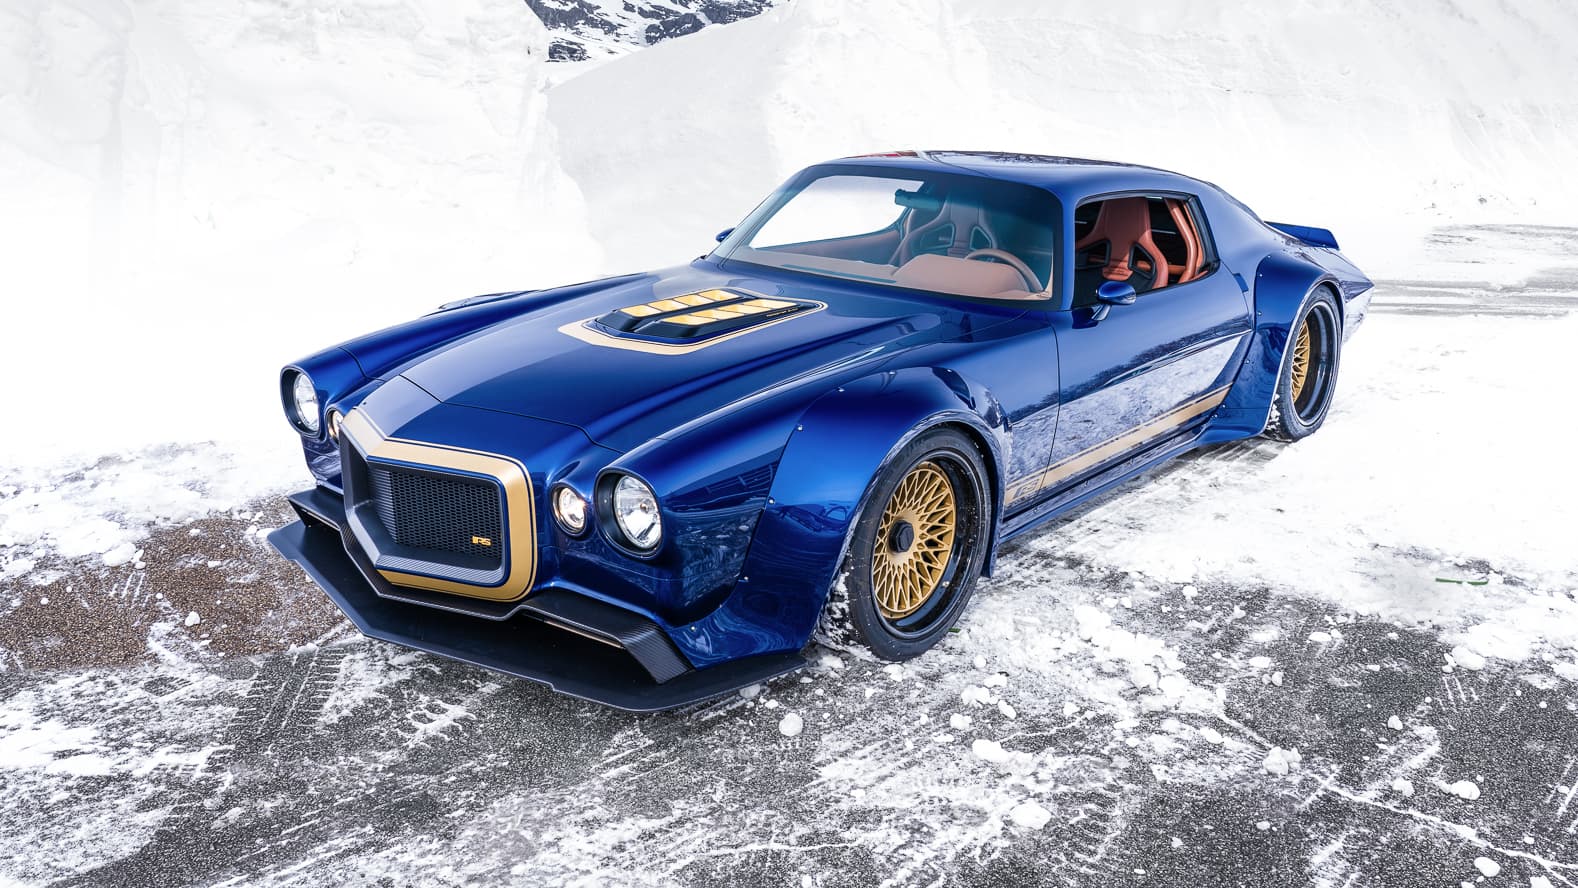 Ignite the Power: 1970 Camaro SS – A Widebody Dominator with a 454 LSX Muscle Heart